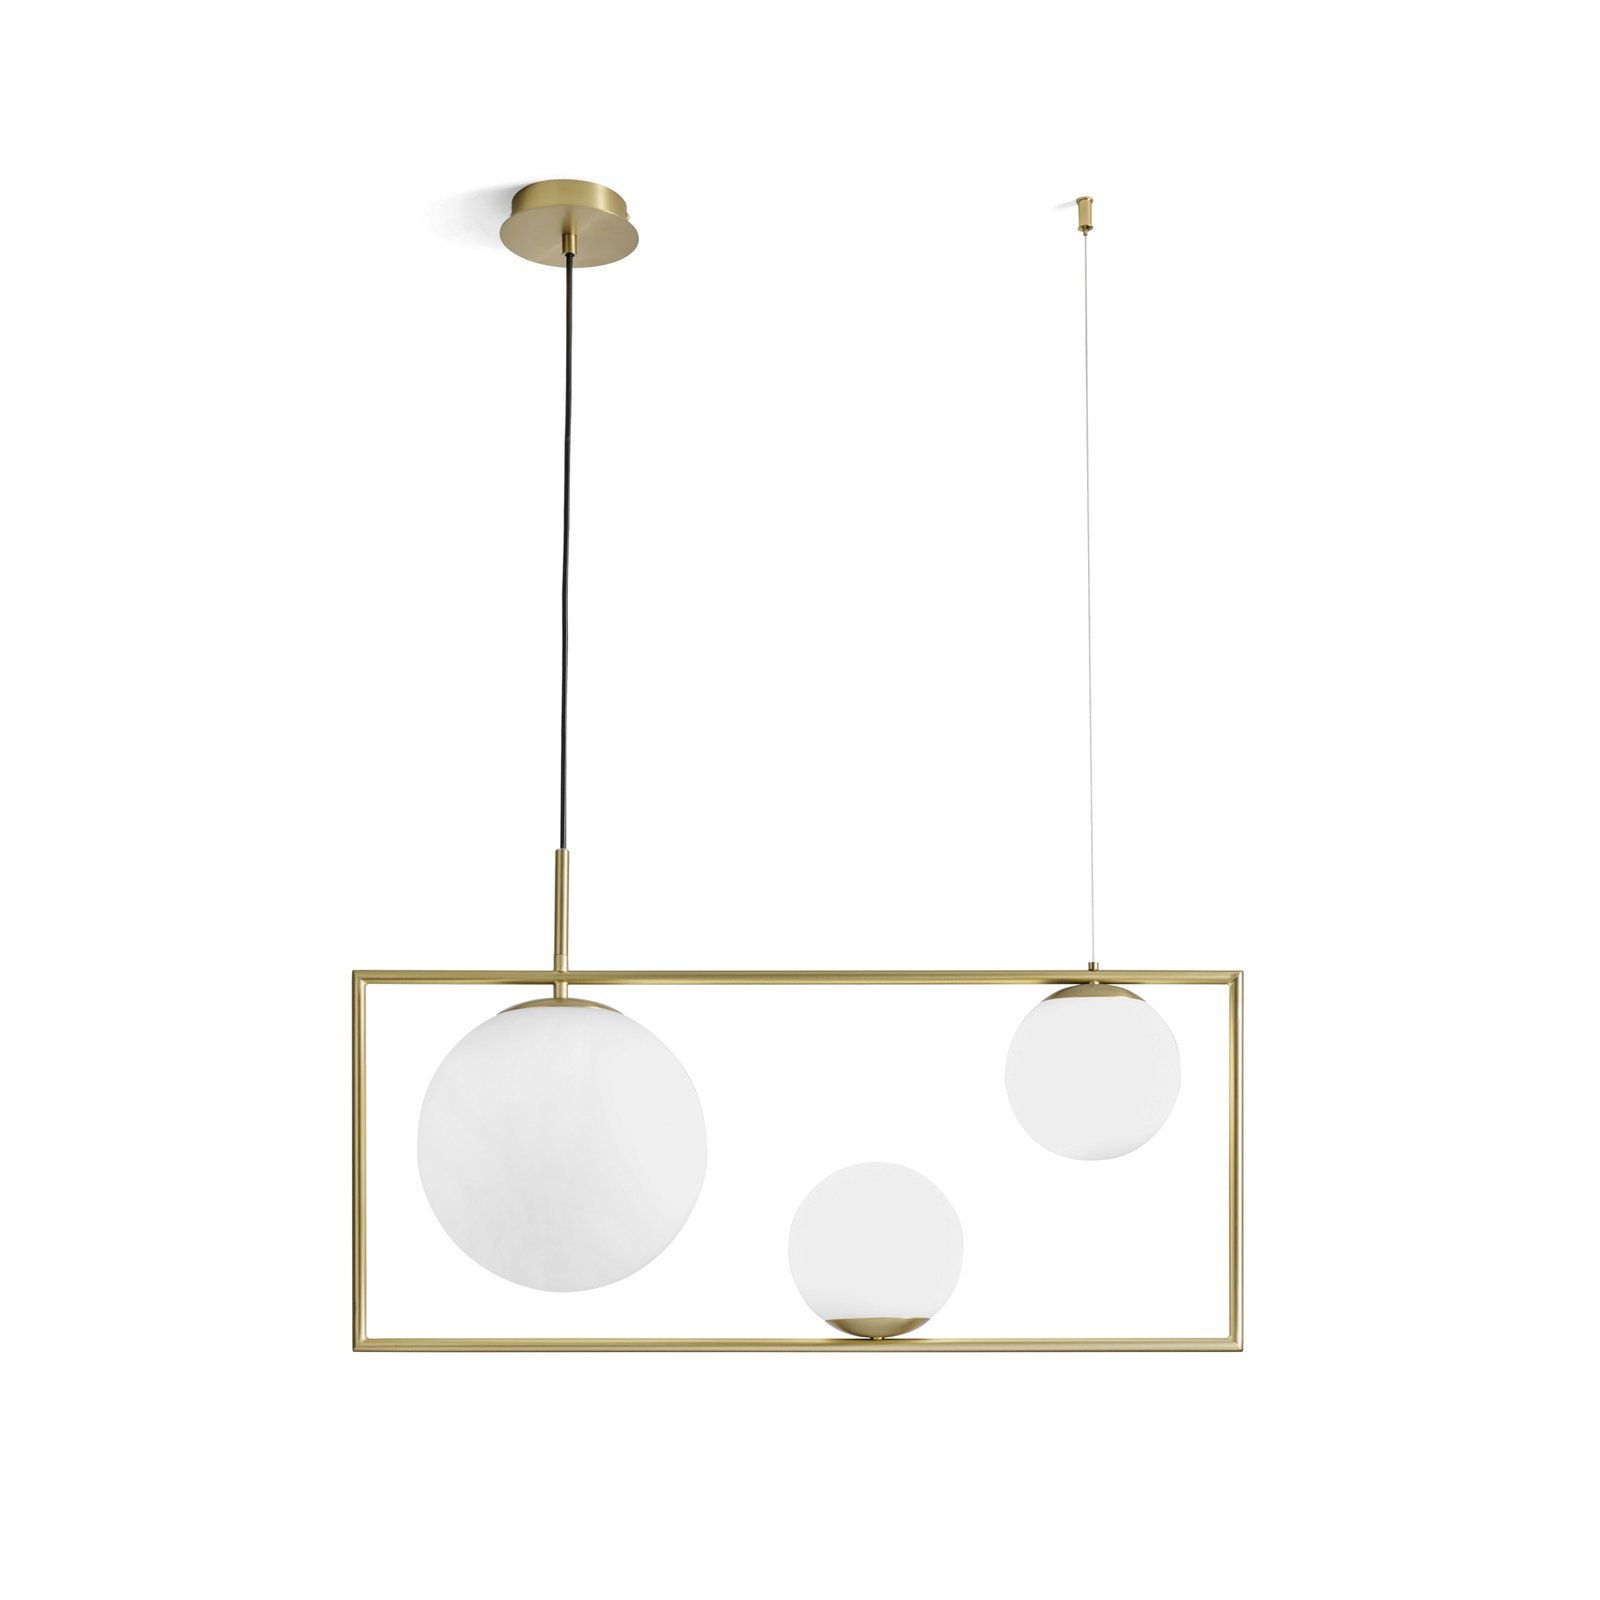 Buble pendant light, gold, 3 opal glass lampshades